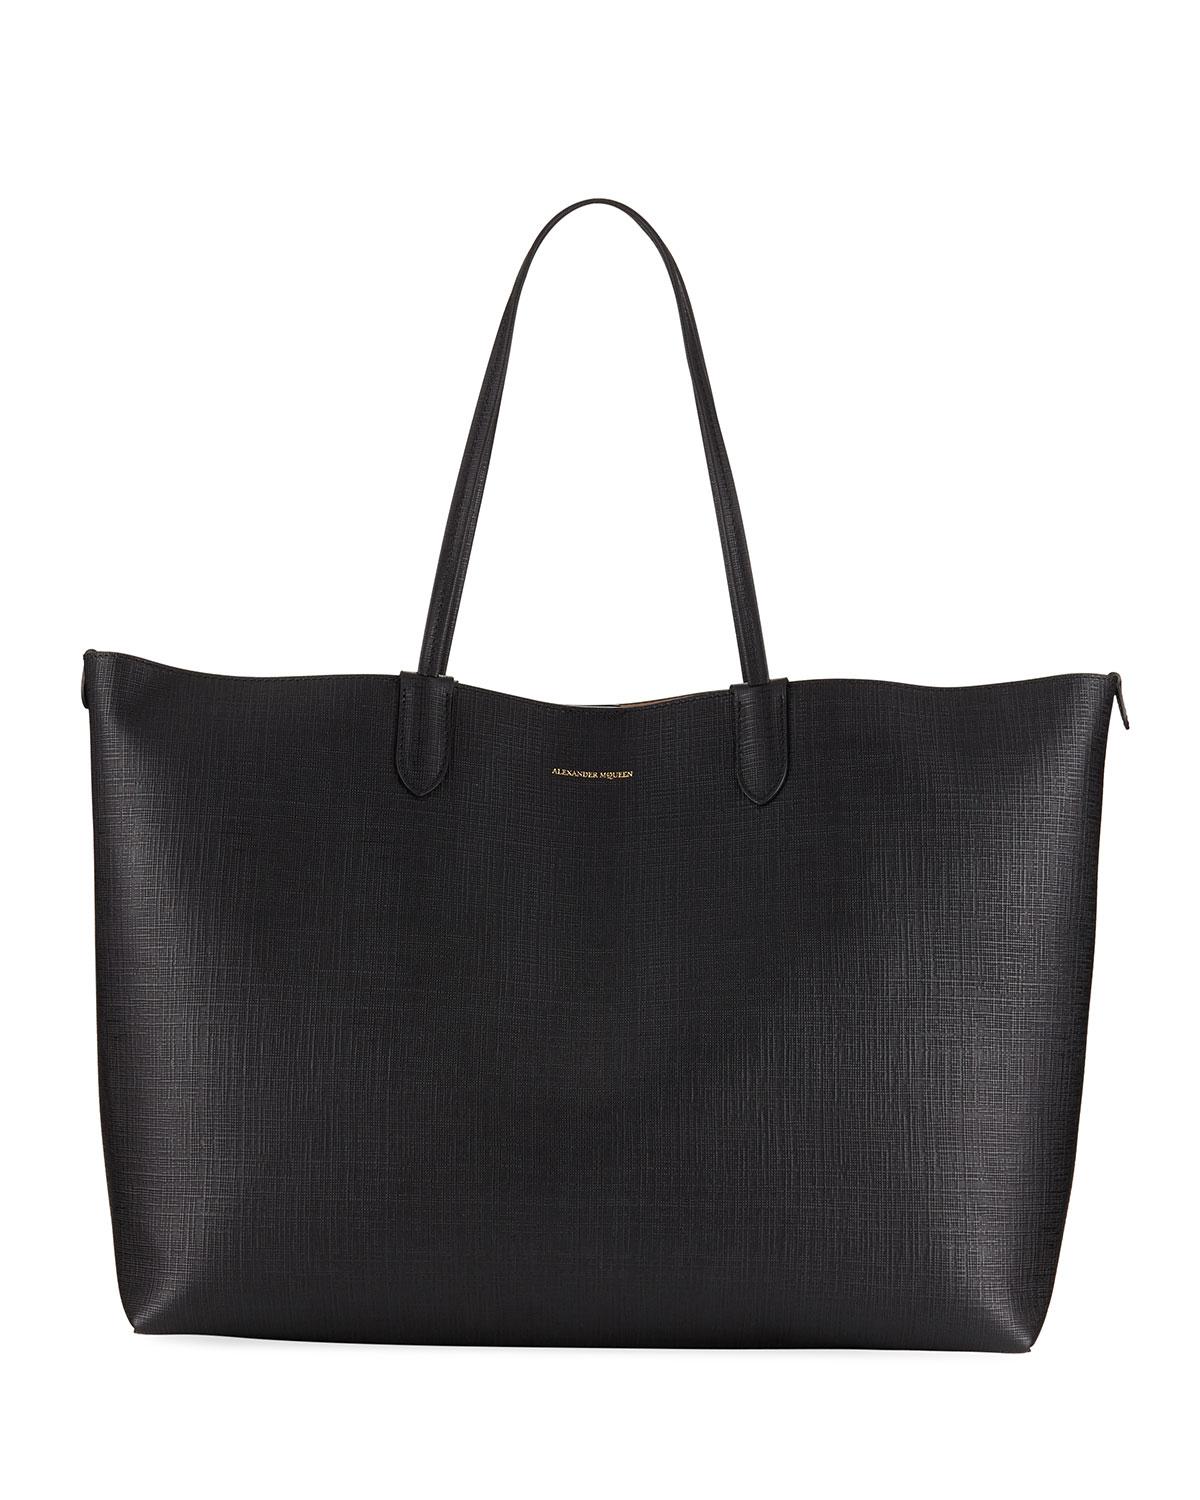 Alexander McQueen Leather Large Textured Shopper Tote Bag in Black - Lyst